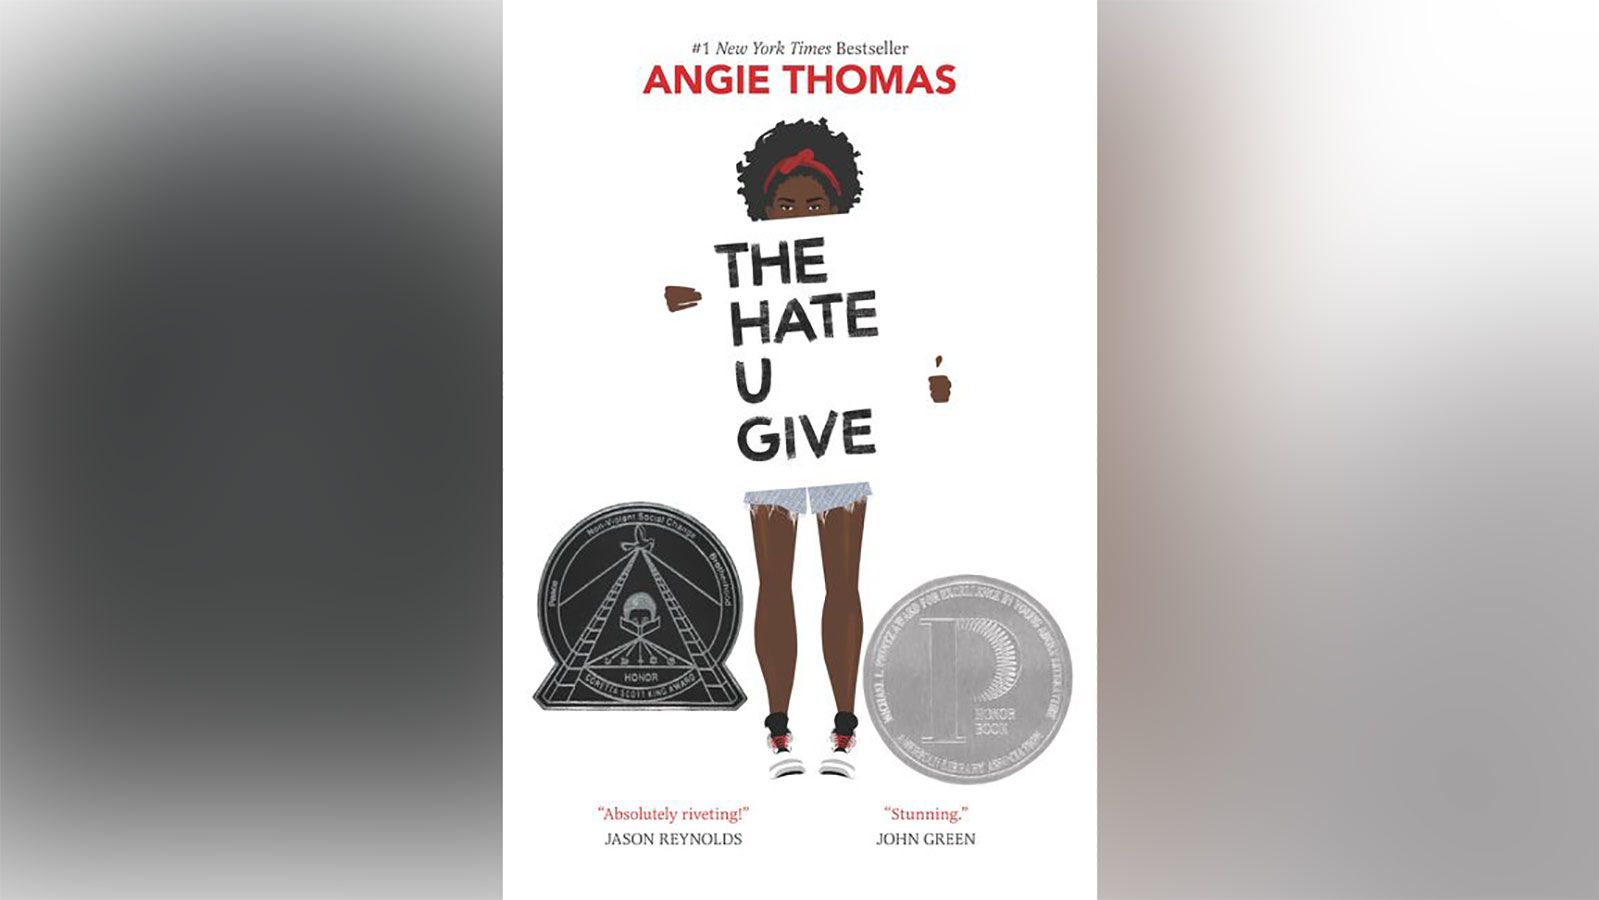 "The Hate U Give" by Angie Thomas is the first pick for the Banned Books Book Club, a new project from the company Reclamation Ventures.